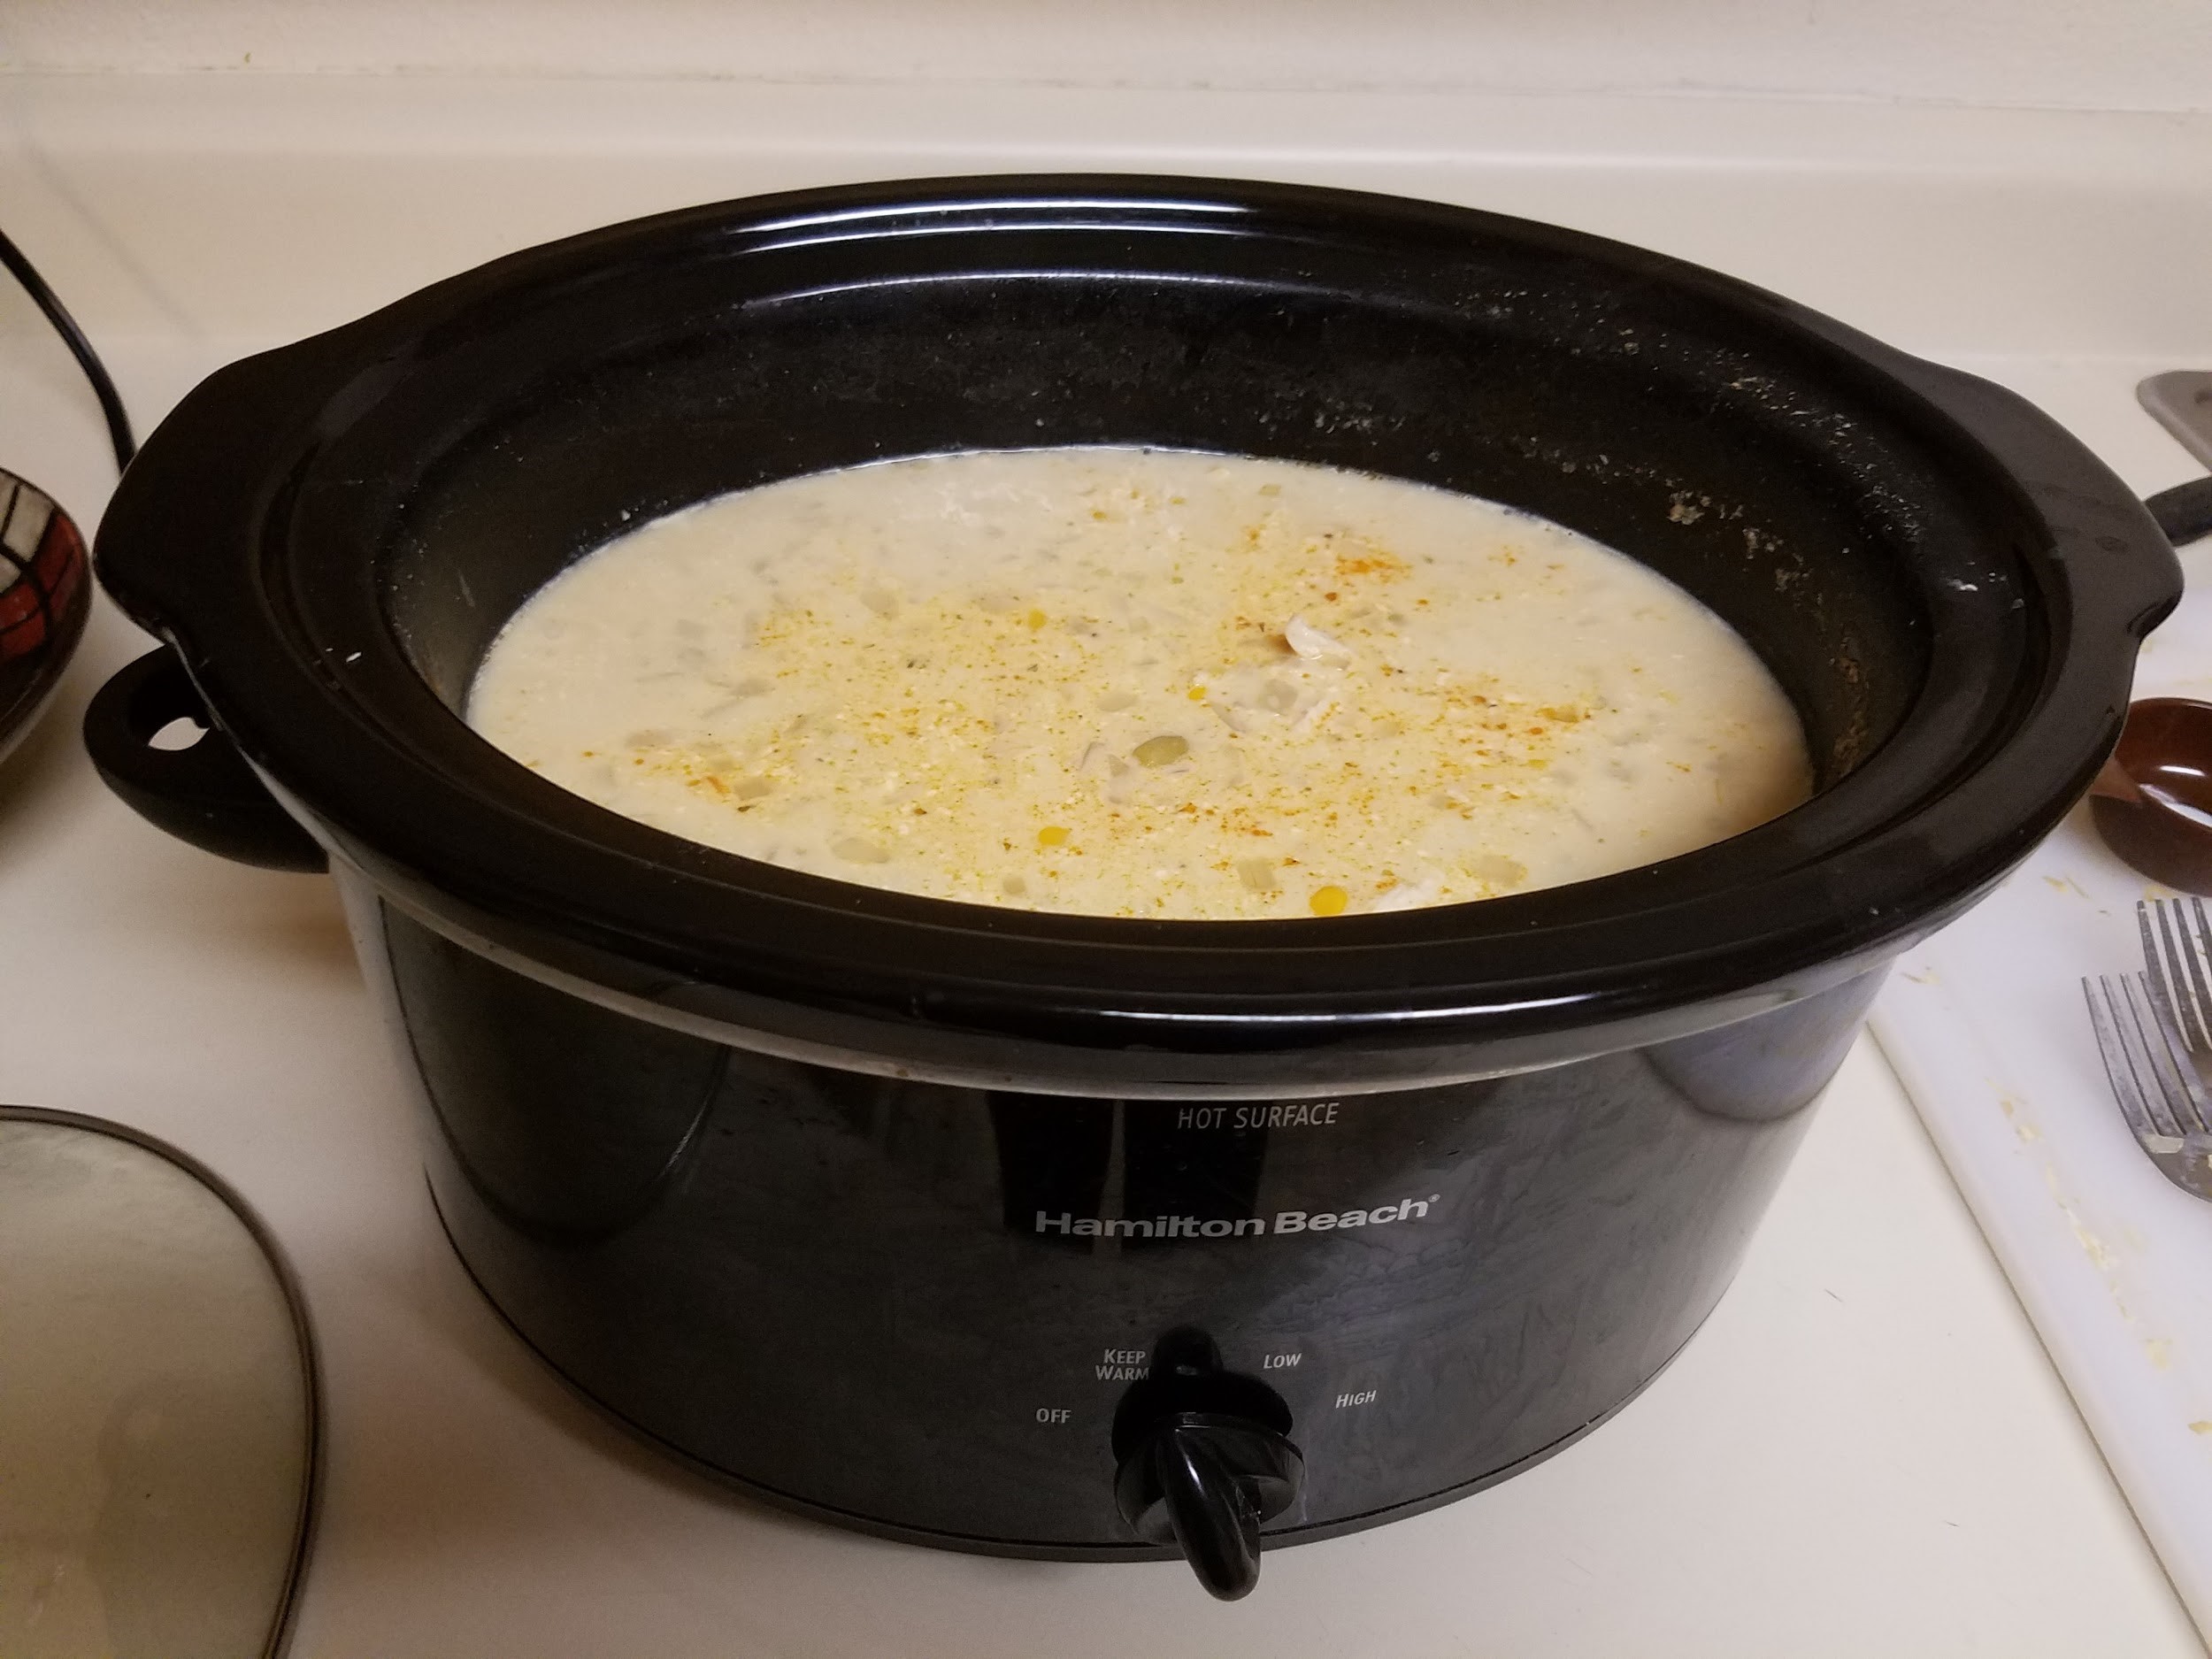 White Chicken Chili ready to serve from crockpot